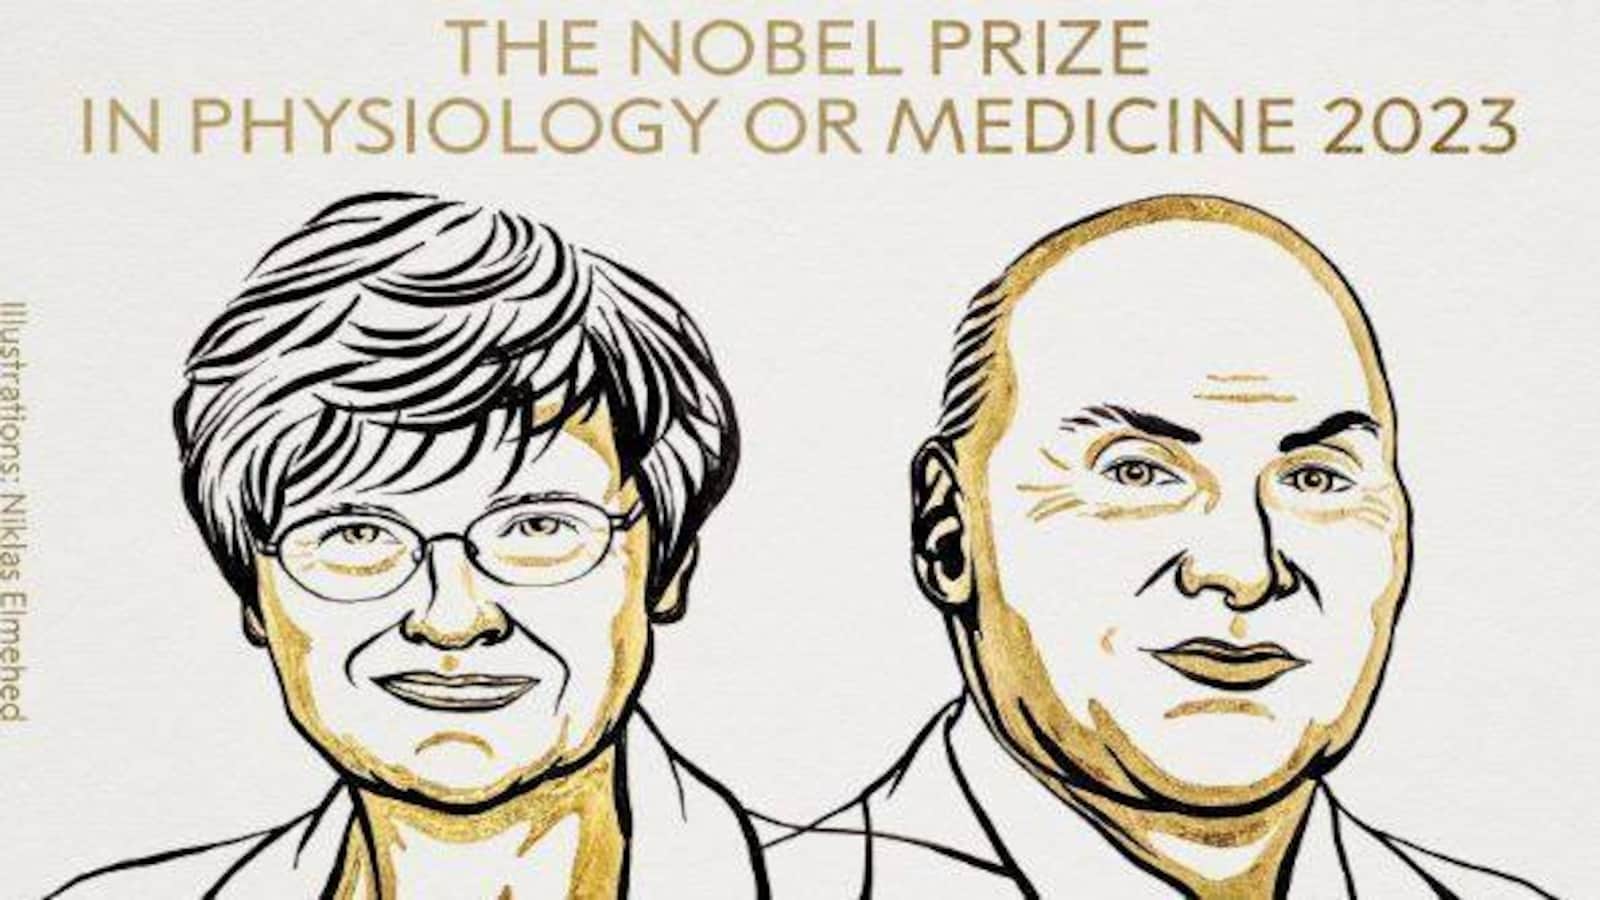 Nobel Prize 2023 in Medicine awarded to Katalin Karikó and Drew Weissman for role in fight against COVID